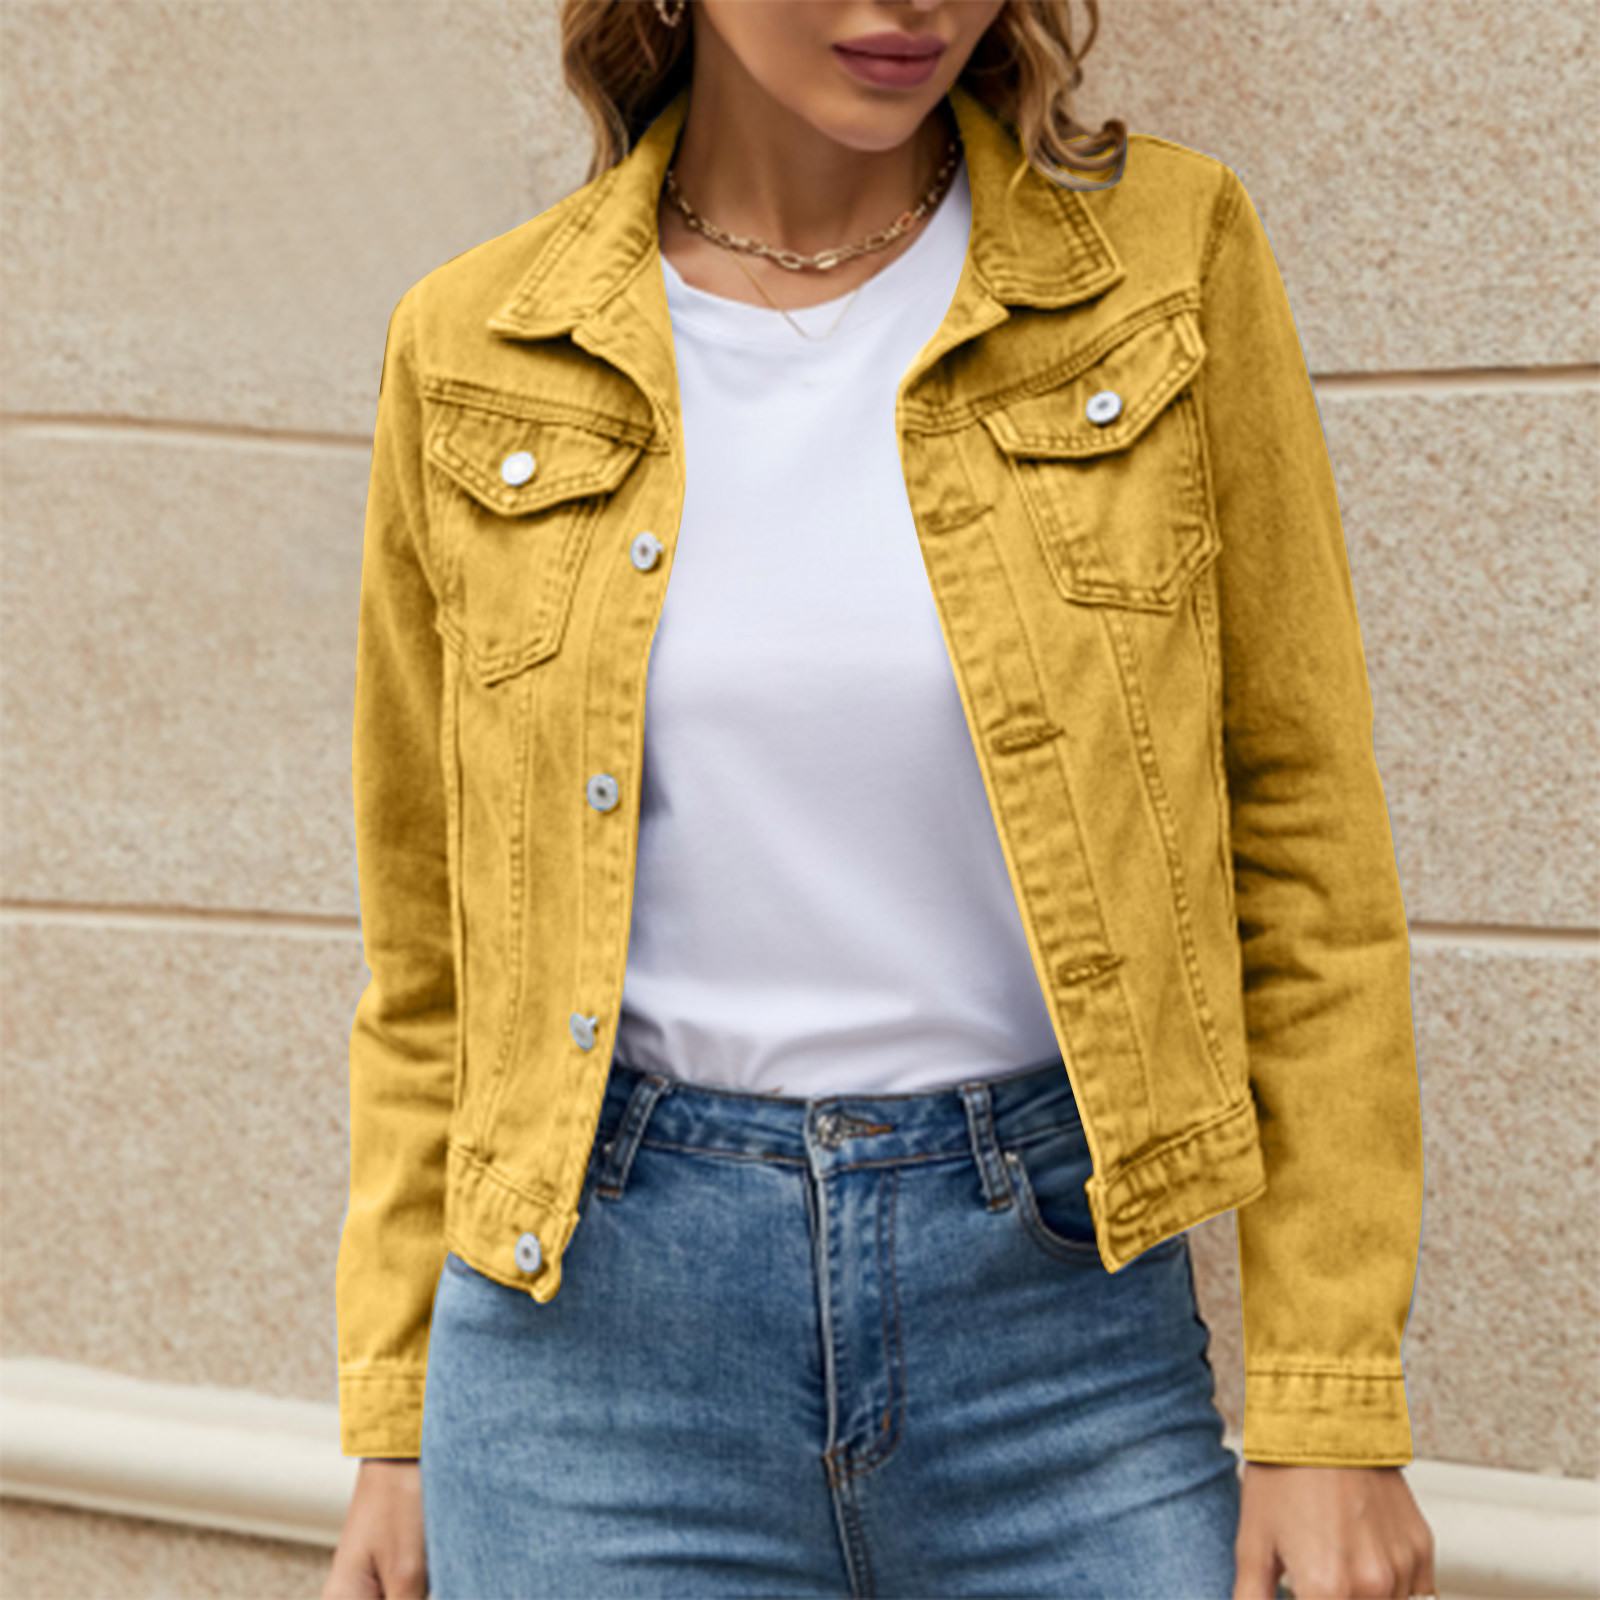 iOPQO womens sweaters Women's Basic Solid Color Button Down Denim Cotton Jacket With Pockets Denim Jacket Coat Women's Denim Jackets Yellow XXL - image 5 of 8